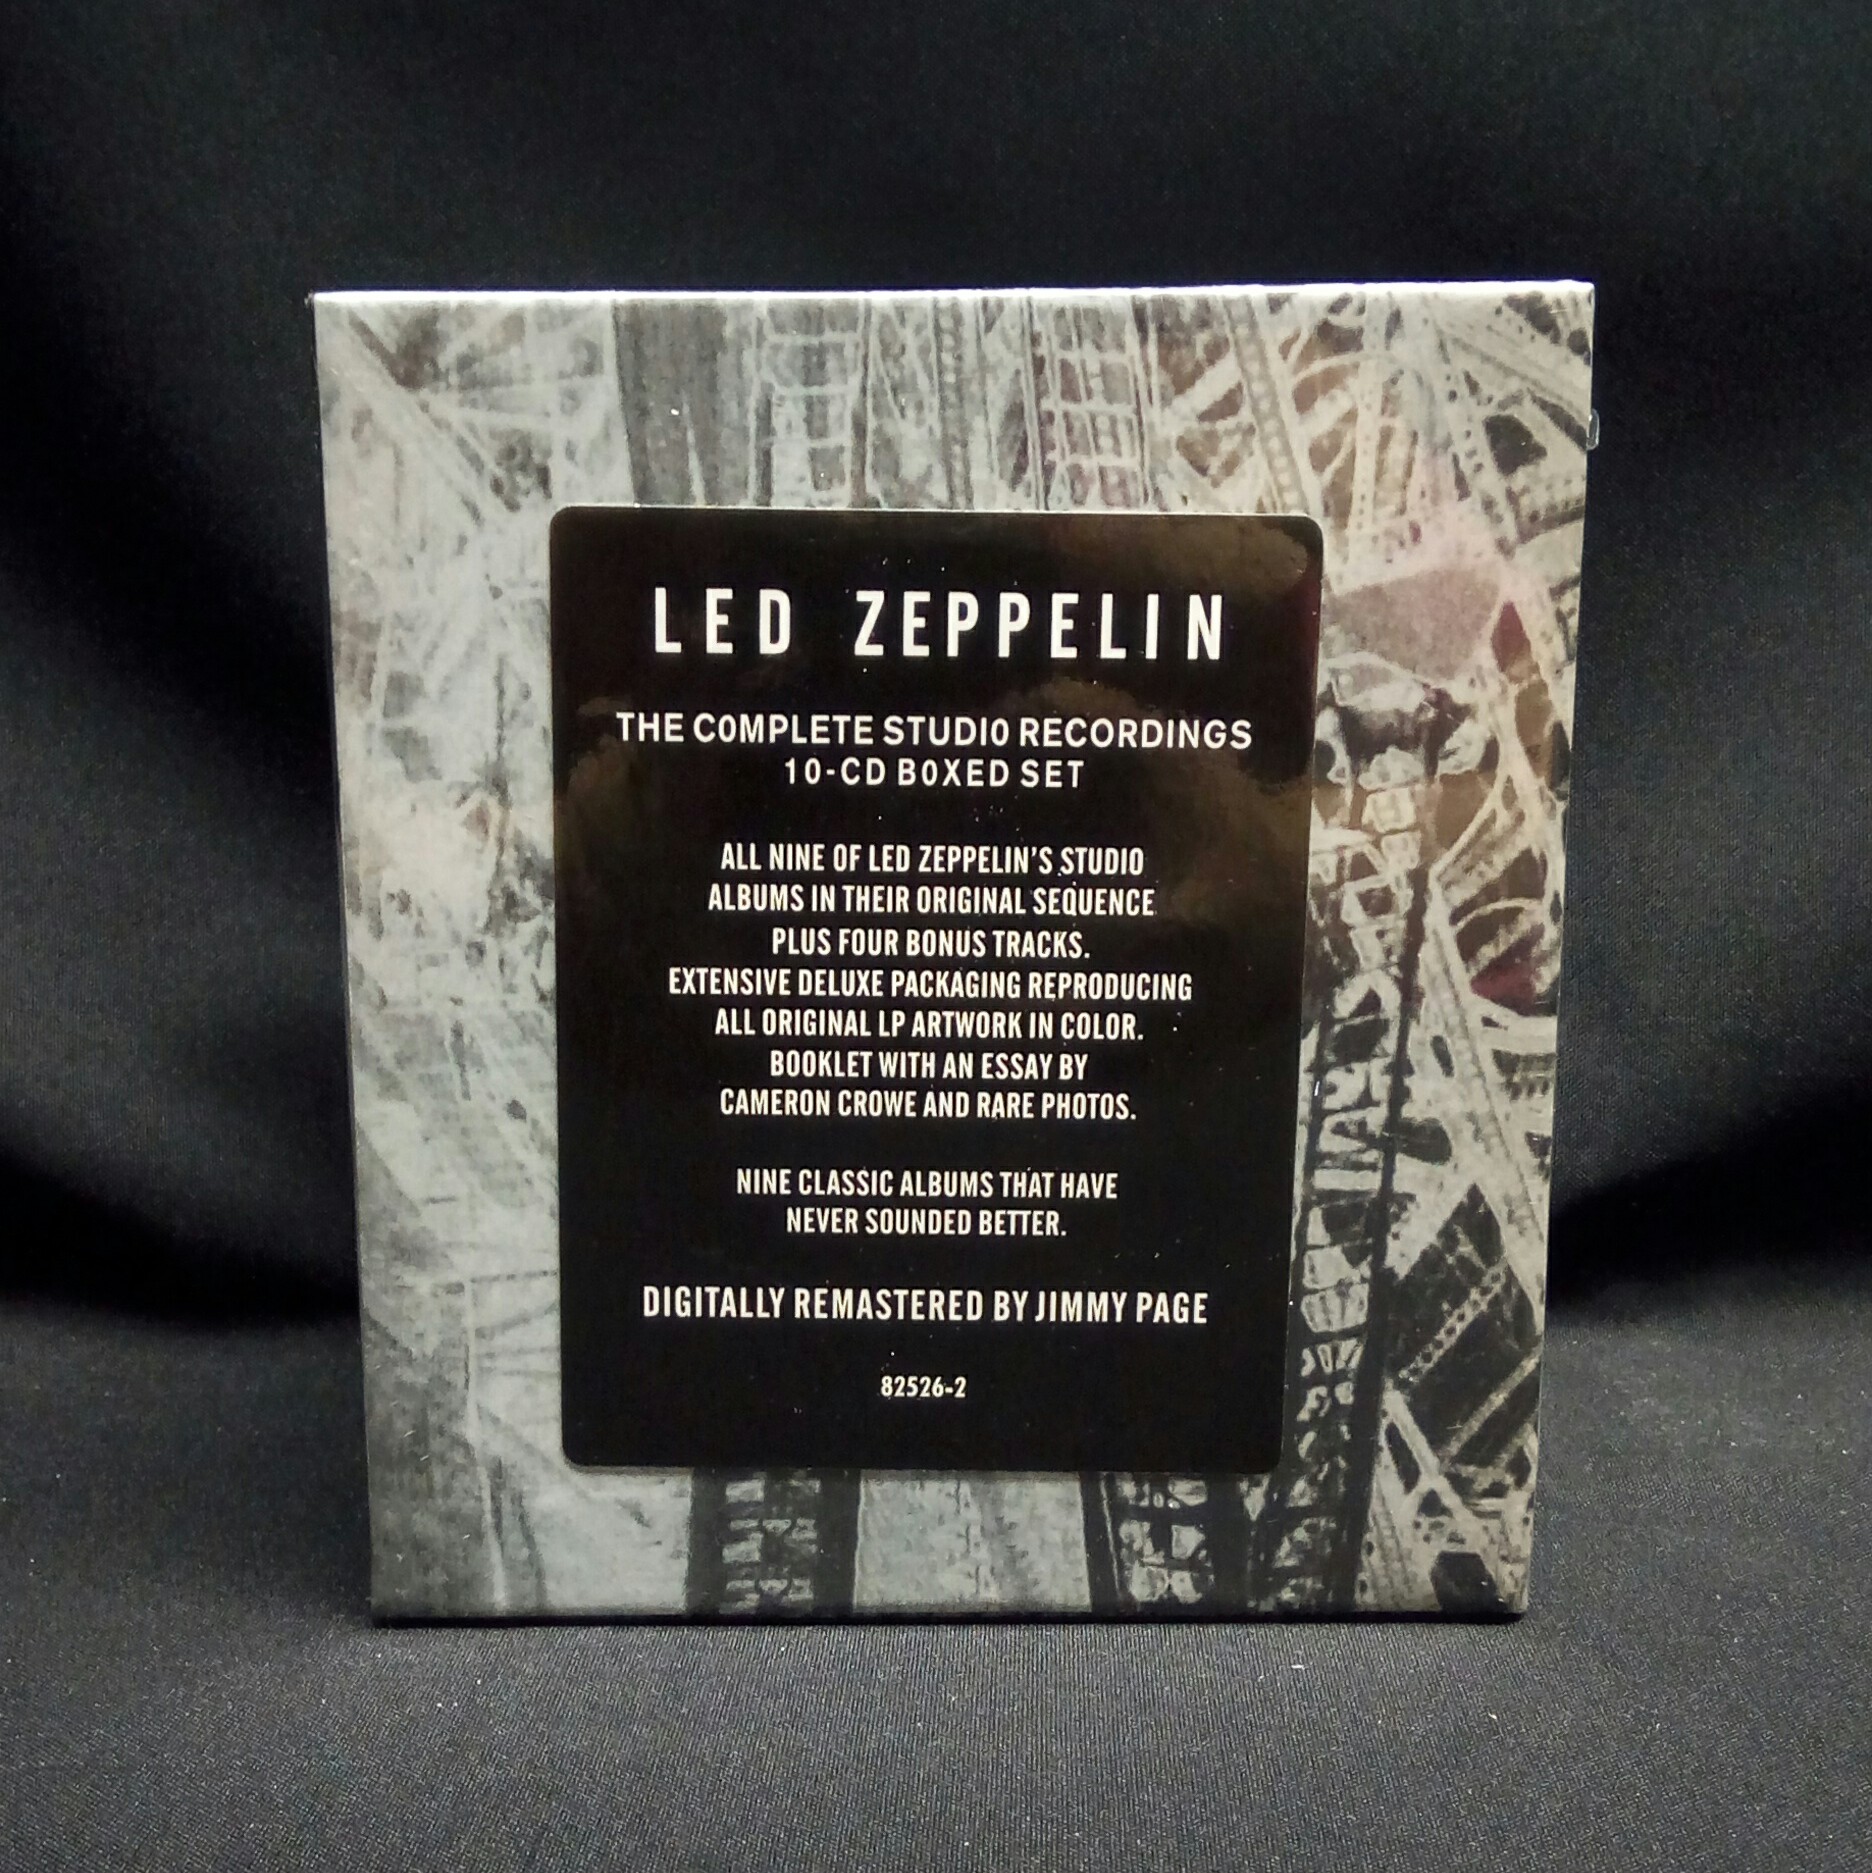 Led Zeppelin: The Complete Studio Recordings 10CD Boxed Set